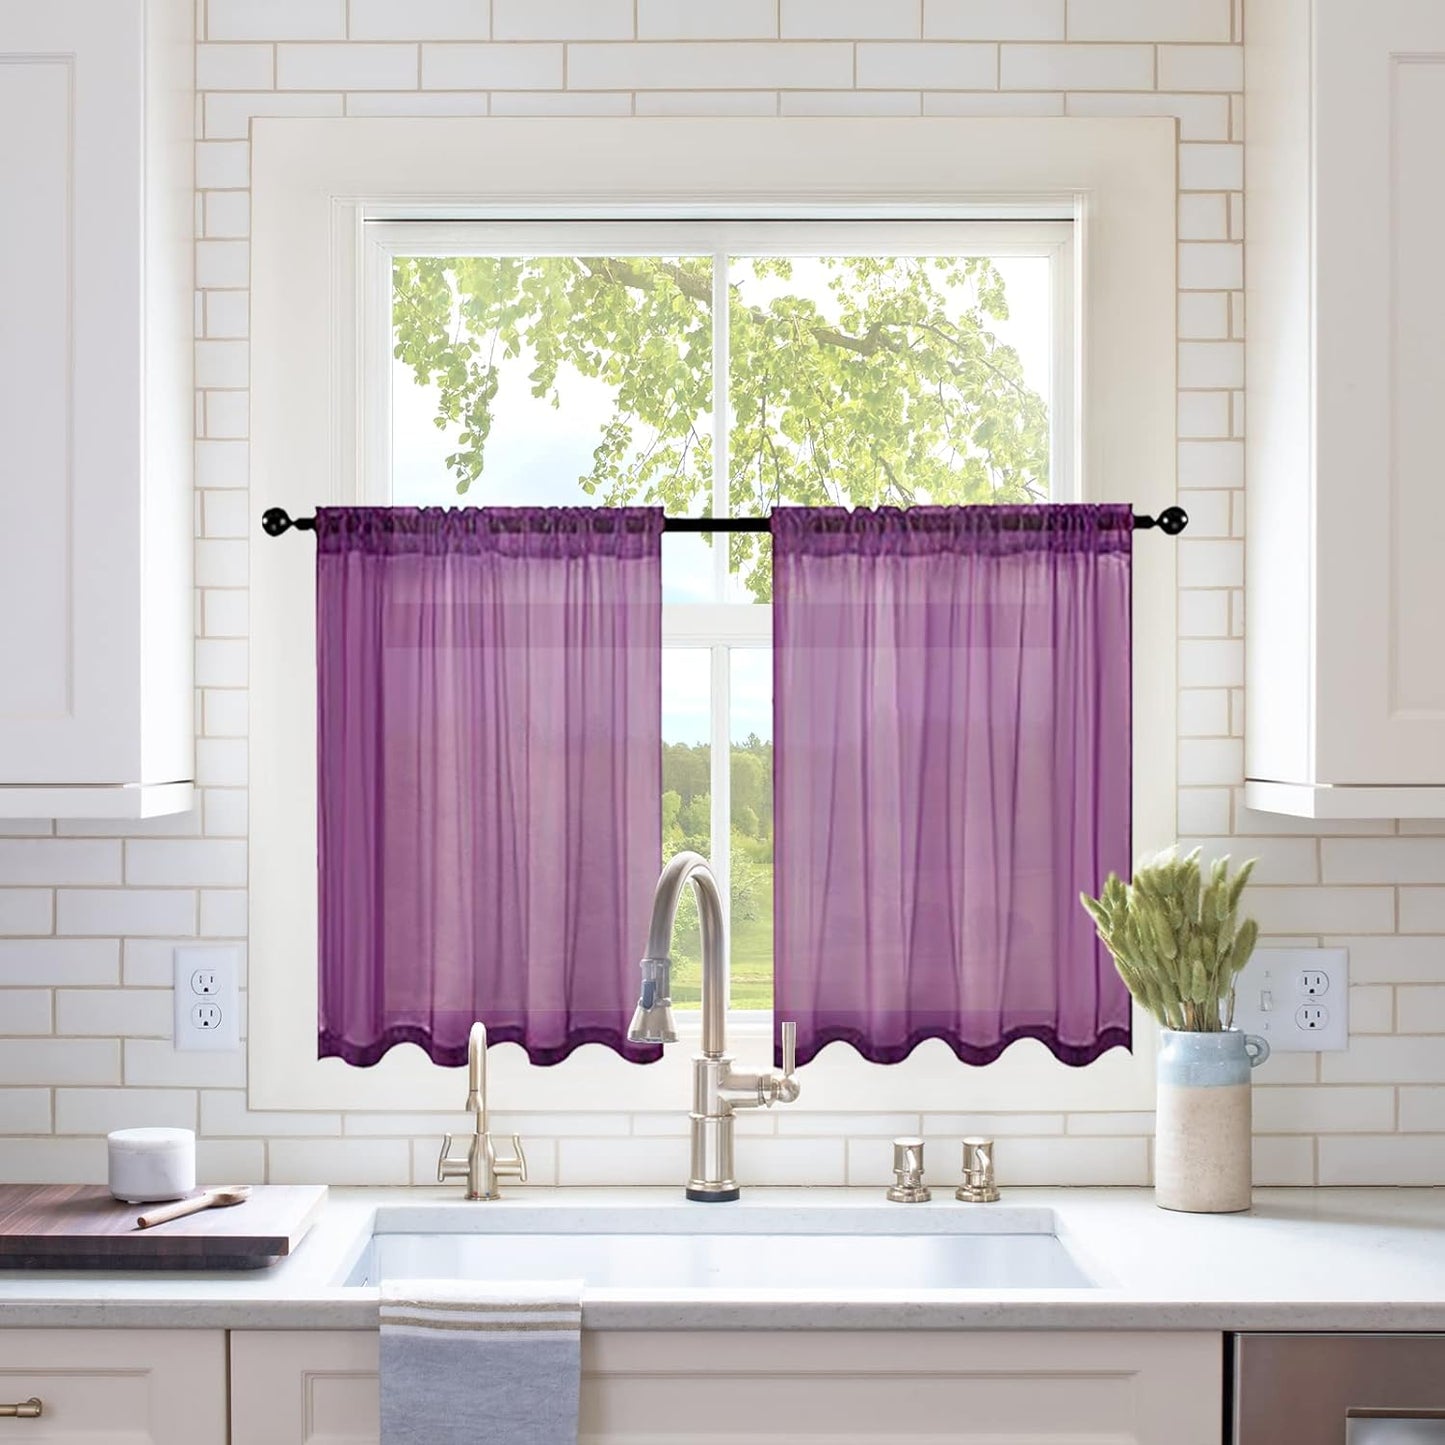 MIULEE White Sheer Curtains 96 Inches Long Window Curtains 2 Panels Solid Color Elegant Window Voile Panels/Drapes/Treatment for Bedroom Living Room (54 X 96 Inches White)  MIULEE Plum Purple 29''W X 36''L 